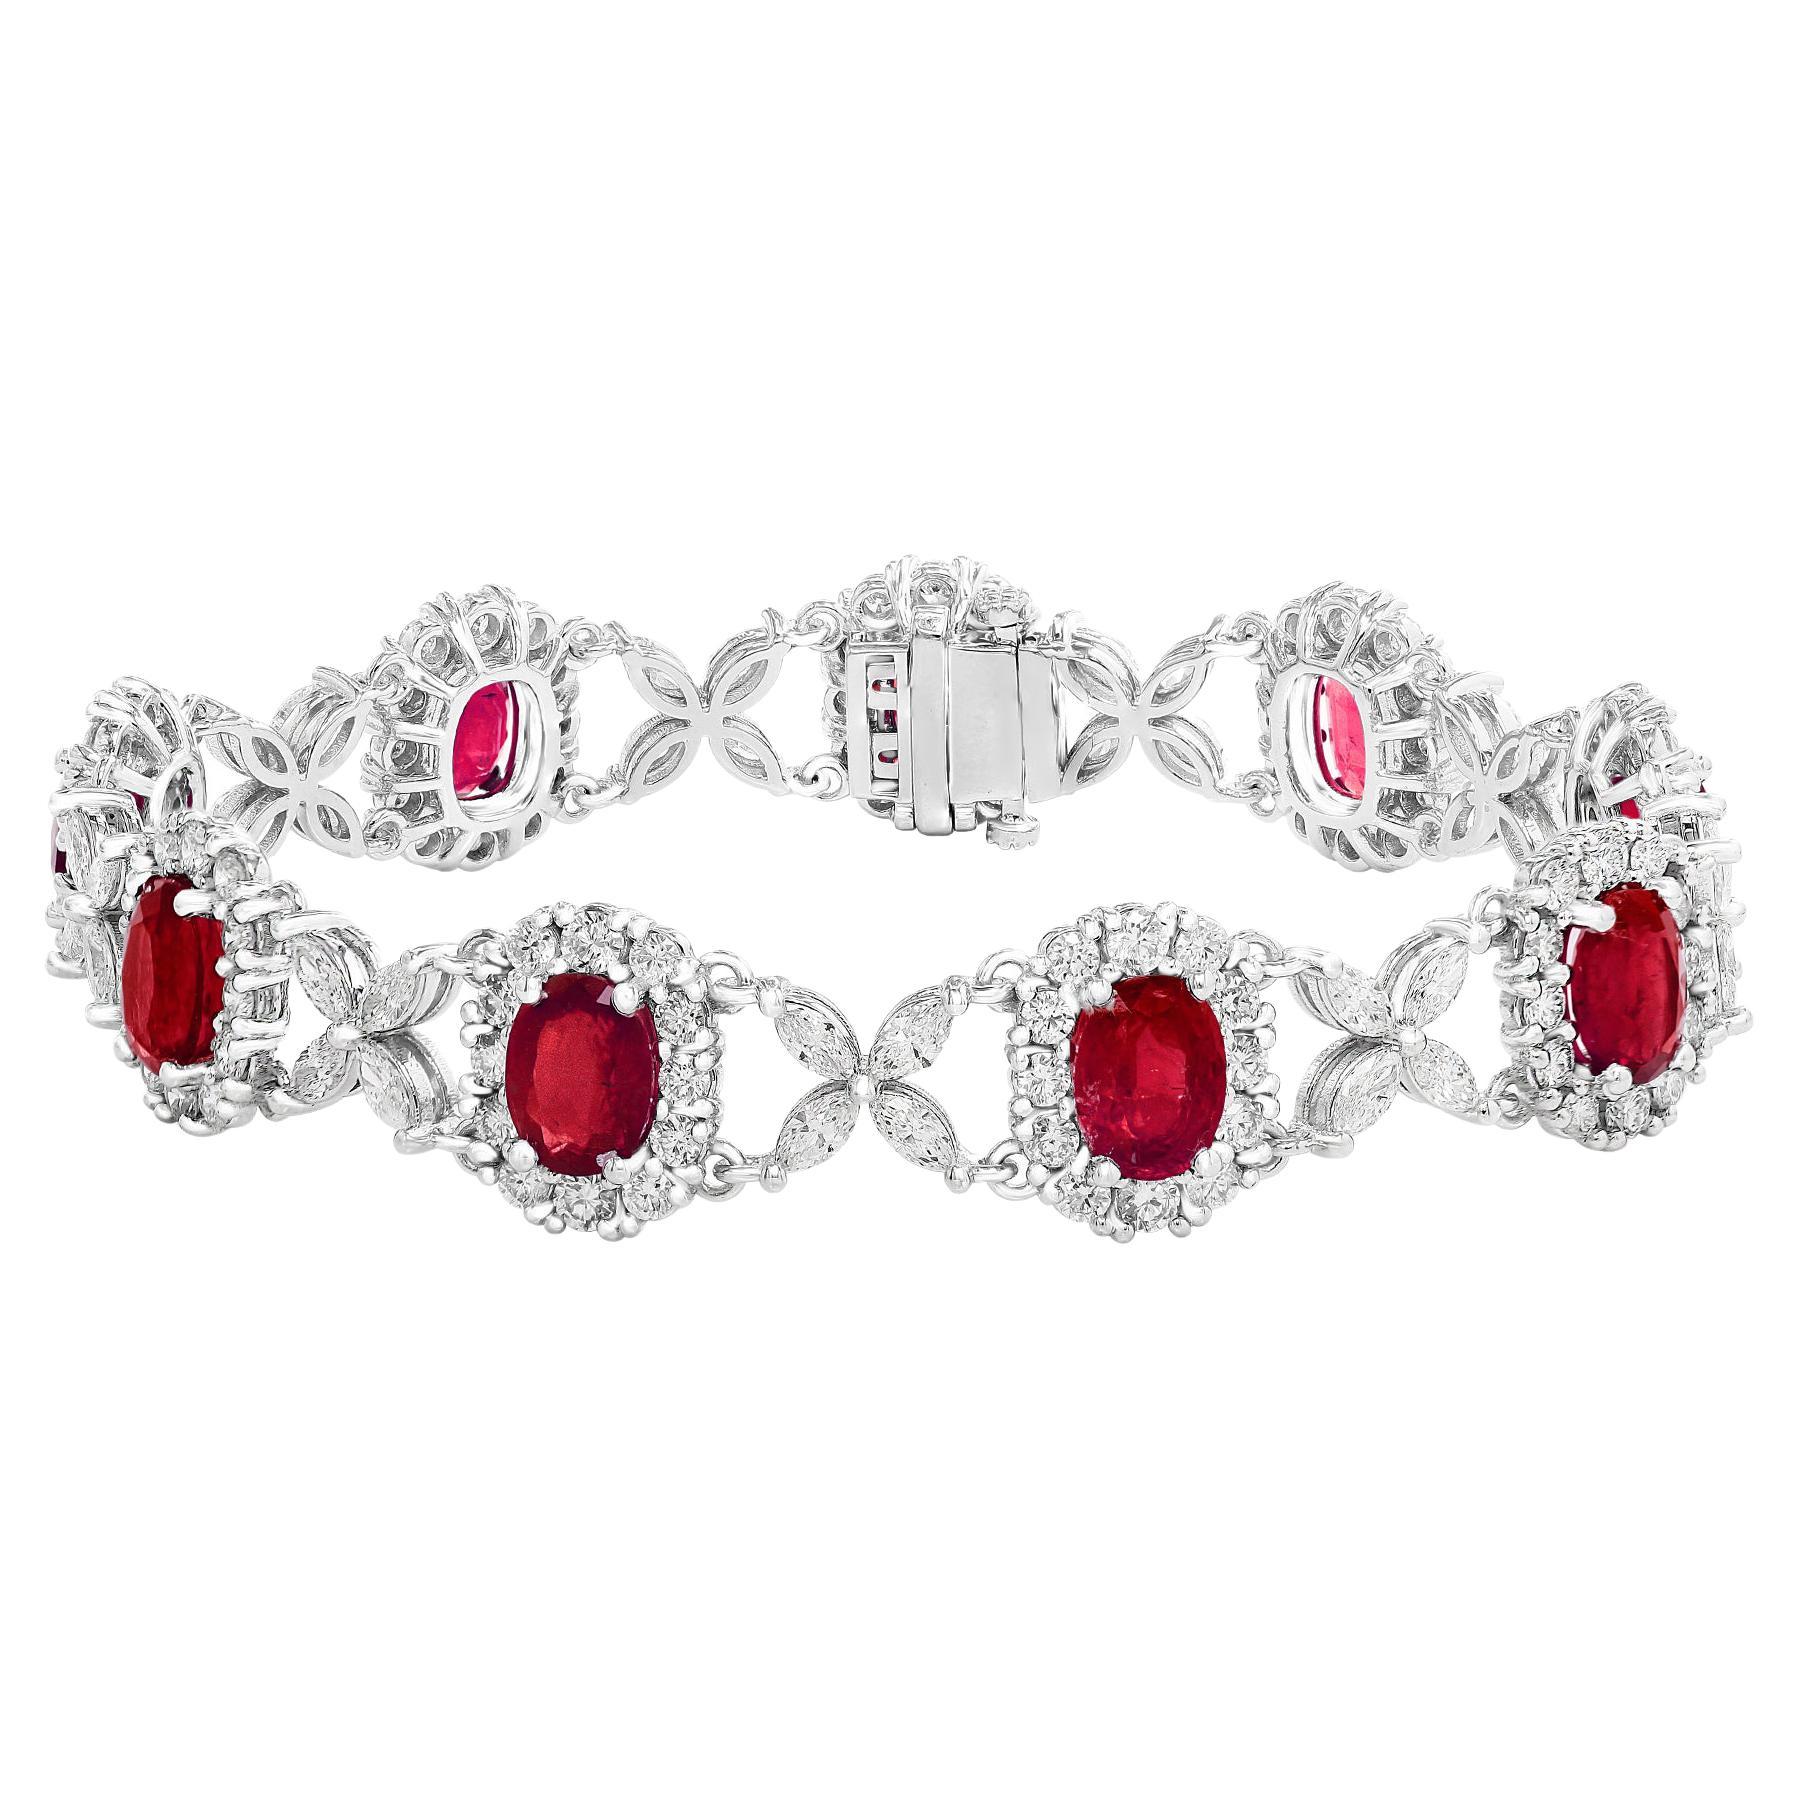 12.54 Carat Oval Cut Ruby and Diamond Tennis Bracelet in 14K White Gold For Sale